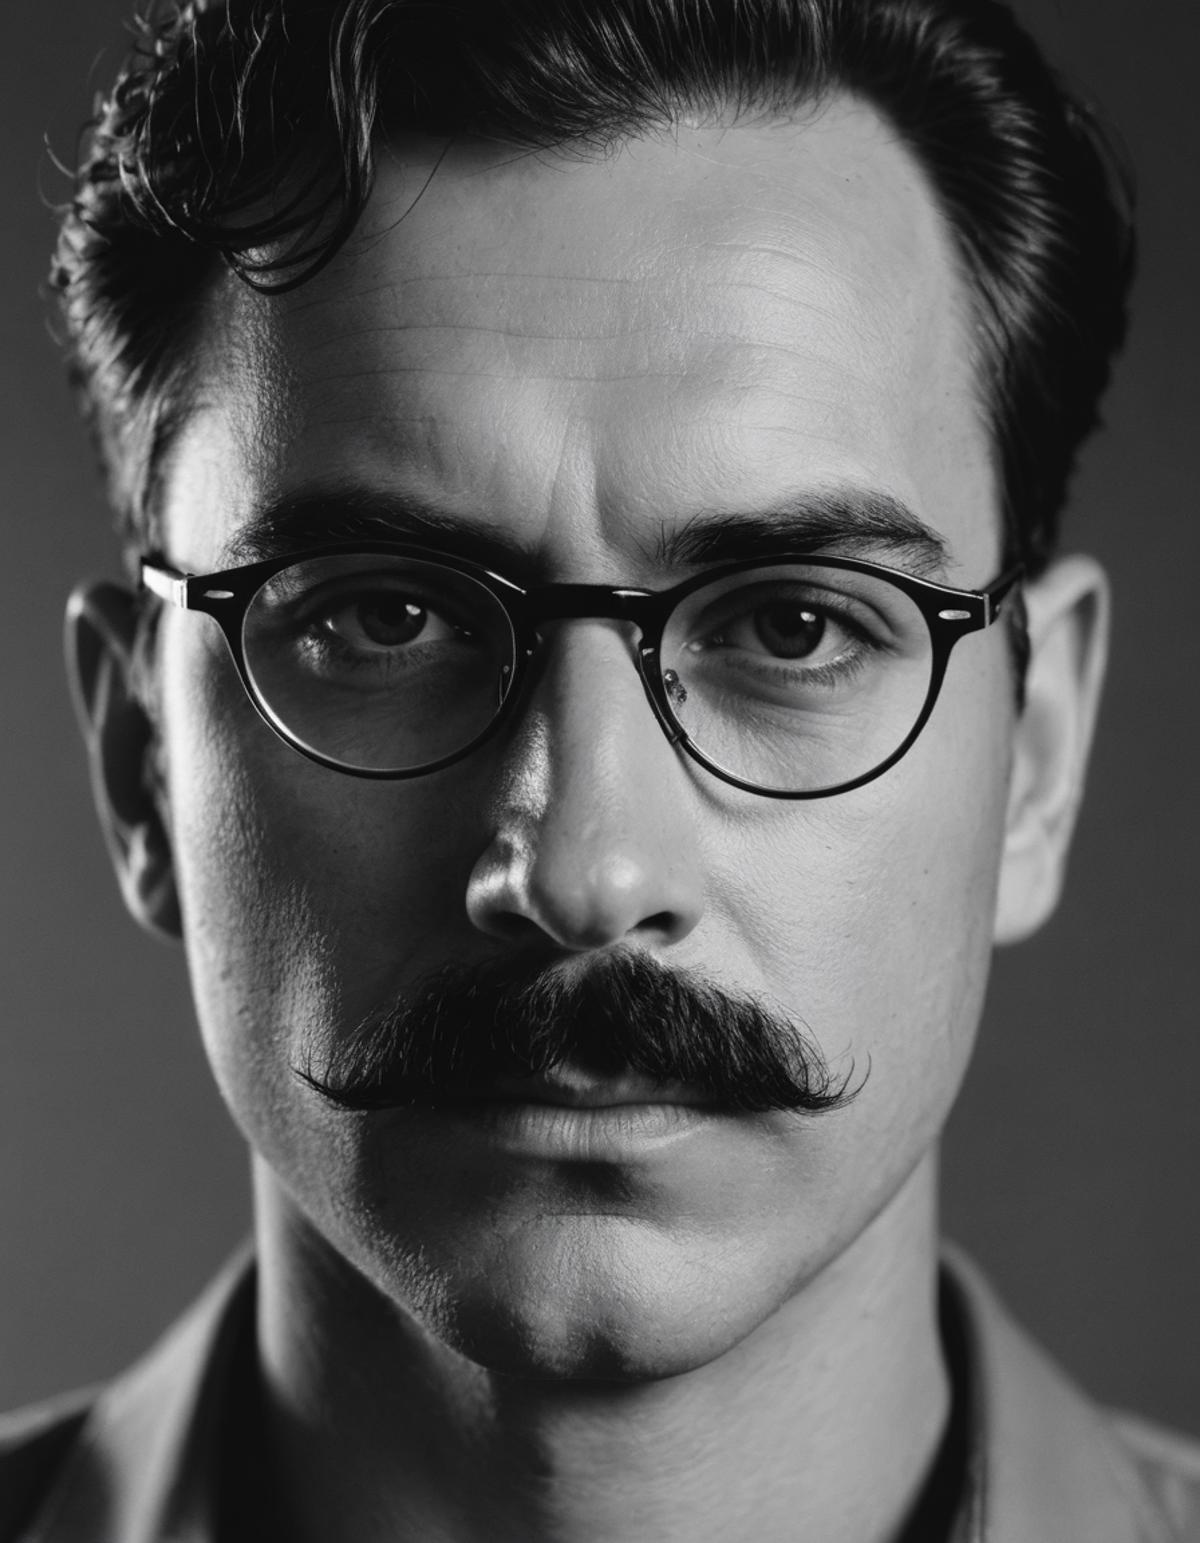 A man wearing glasses and a mustache staring into the camera.